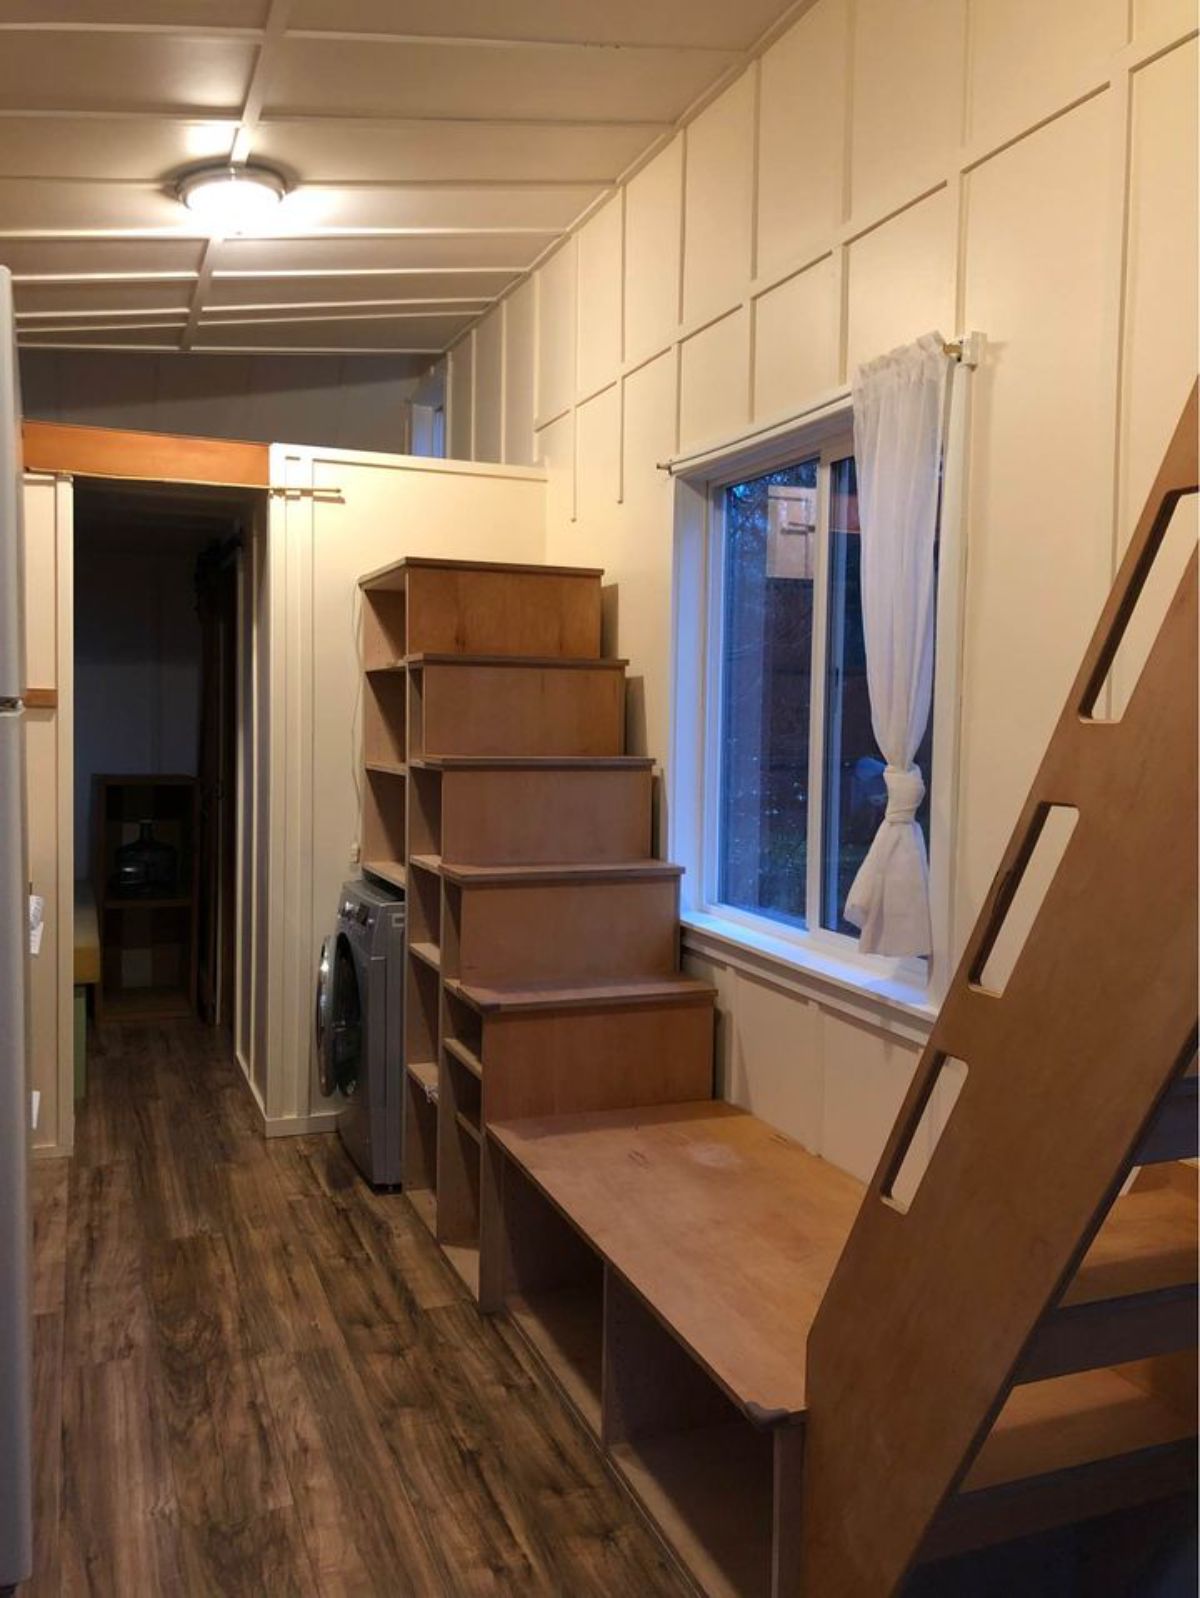 Stairs towards both the lofts of 26' Tiny Home